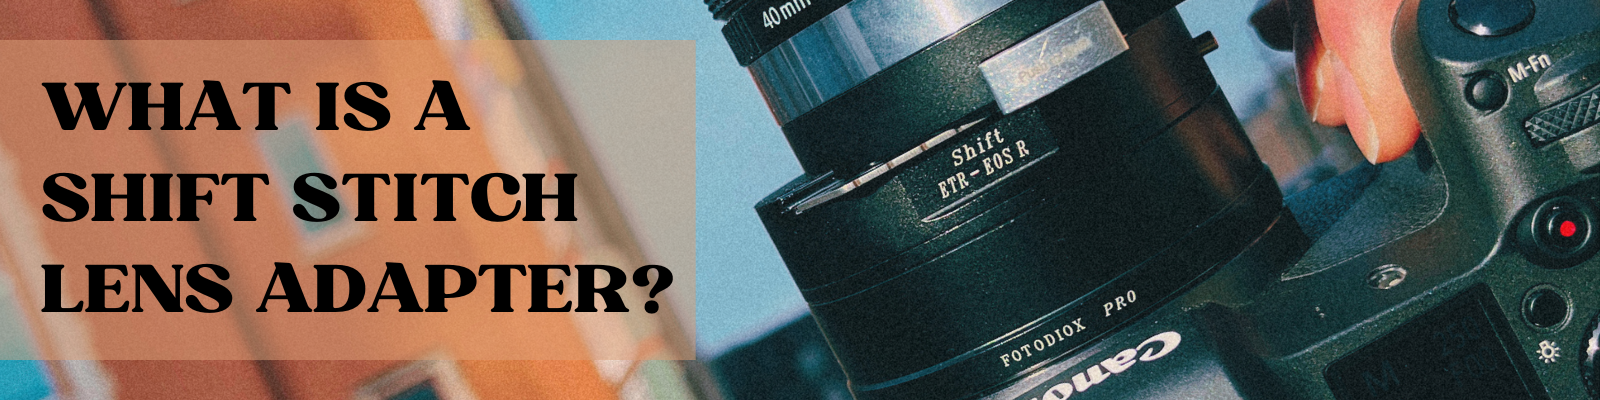 What is a Shift Stitch Lens Adapter?